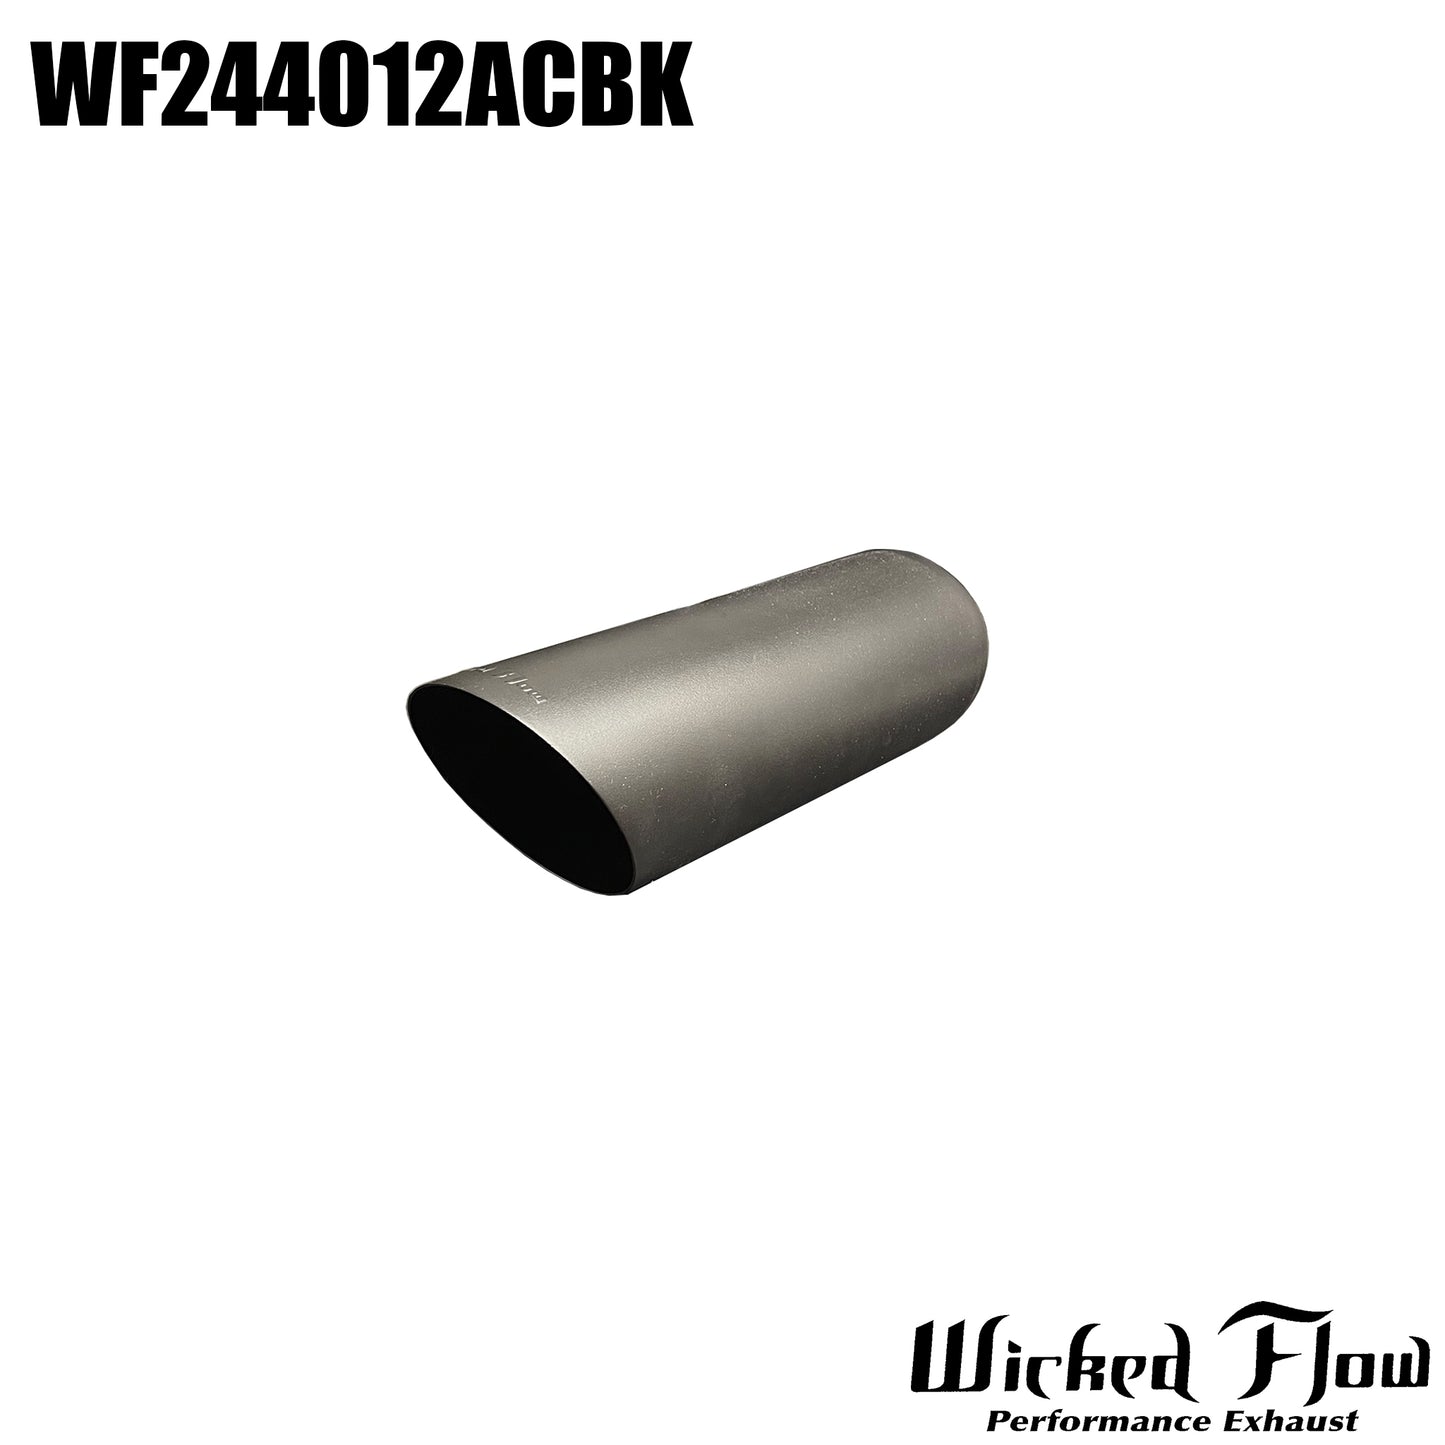 WF244012ACBK - EXHAUST TIP - 2.25" Inlet 12" Length - ANGLE CUT POWDERCOATED